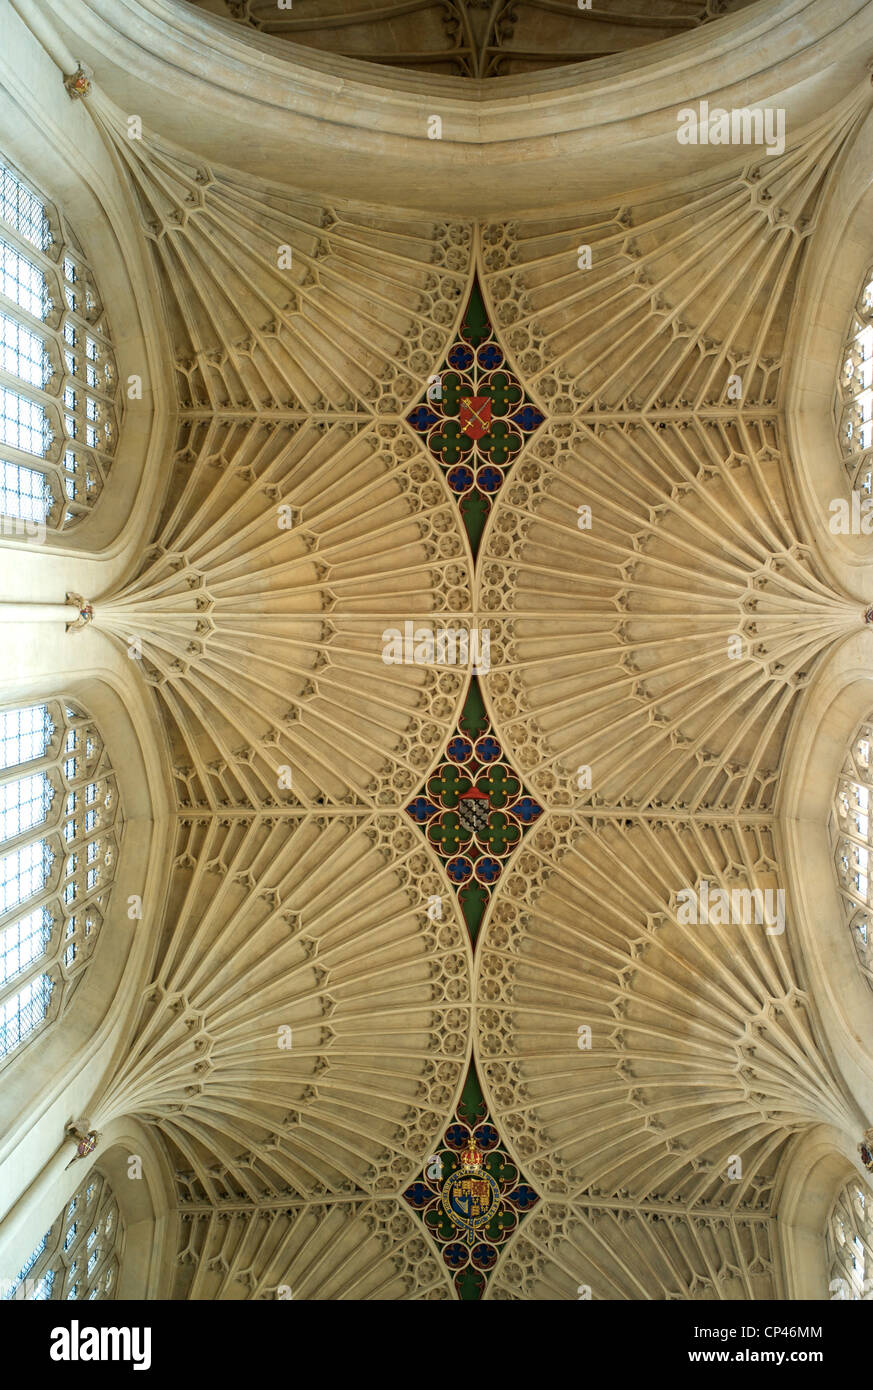 Fan vaulted ceiling, the Abbey, Bath, UK Stock Photo